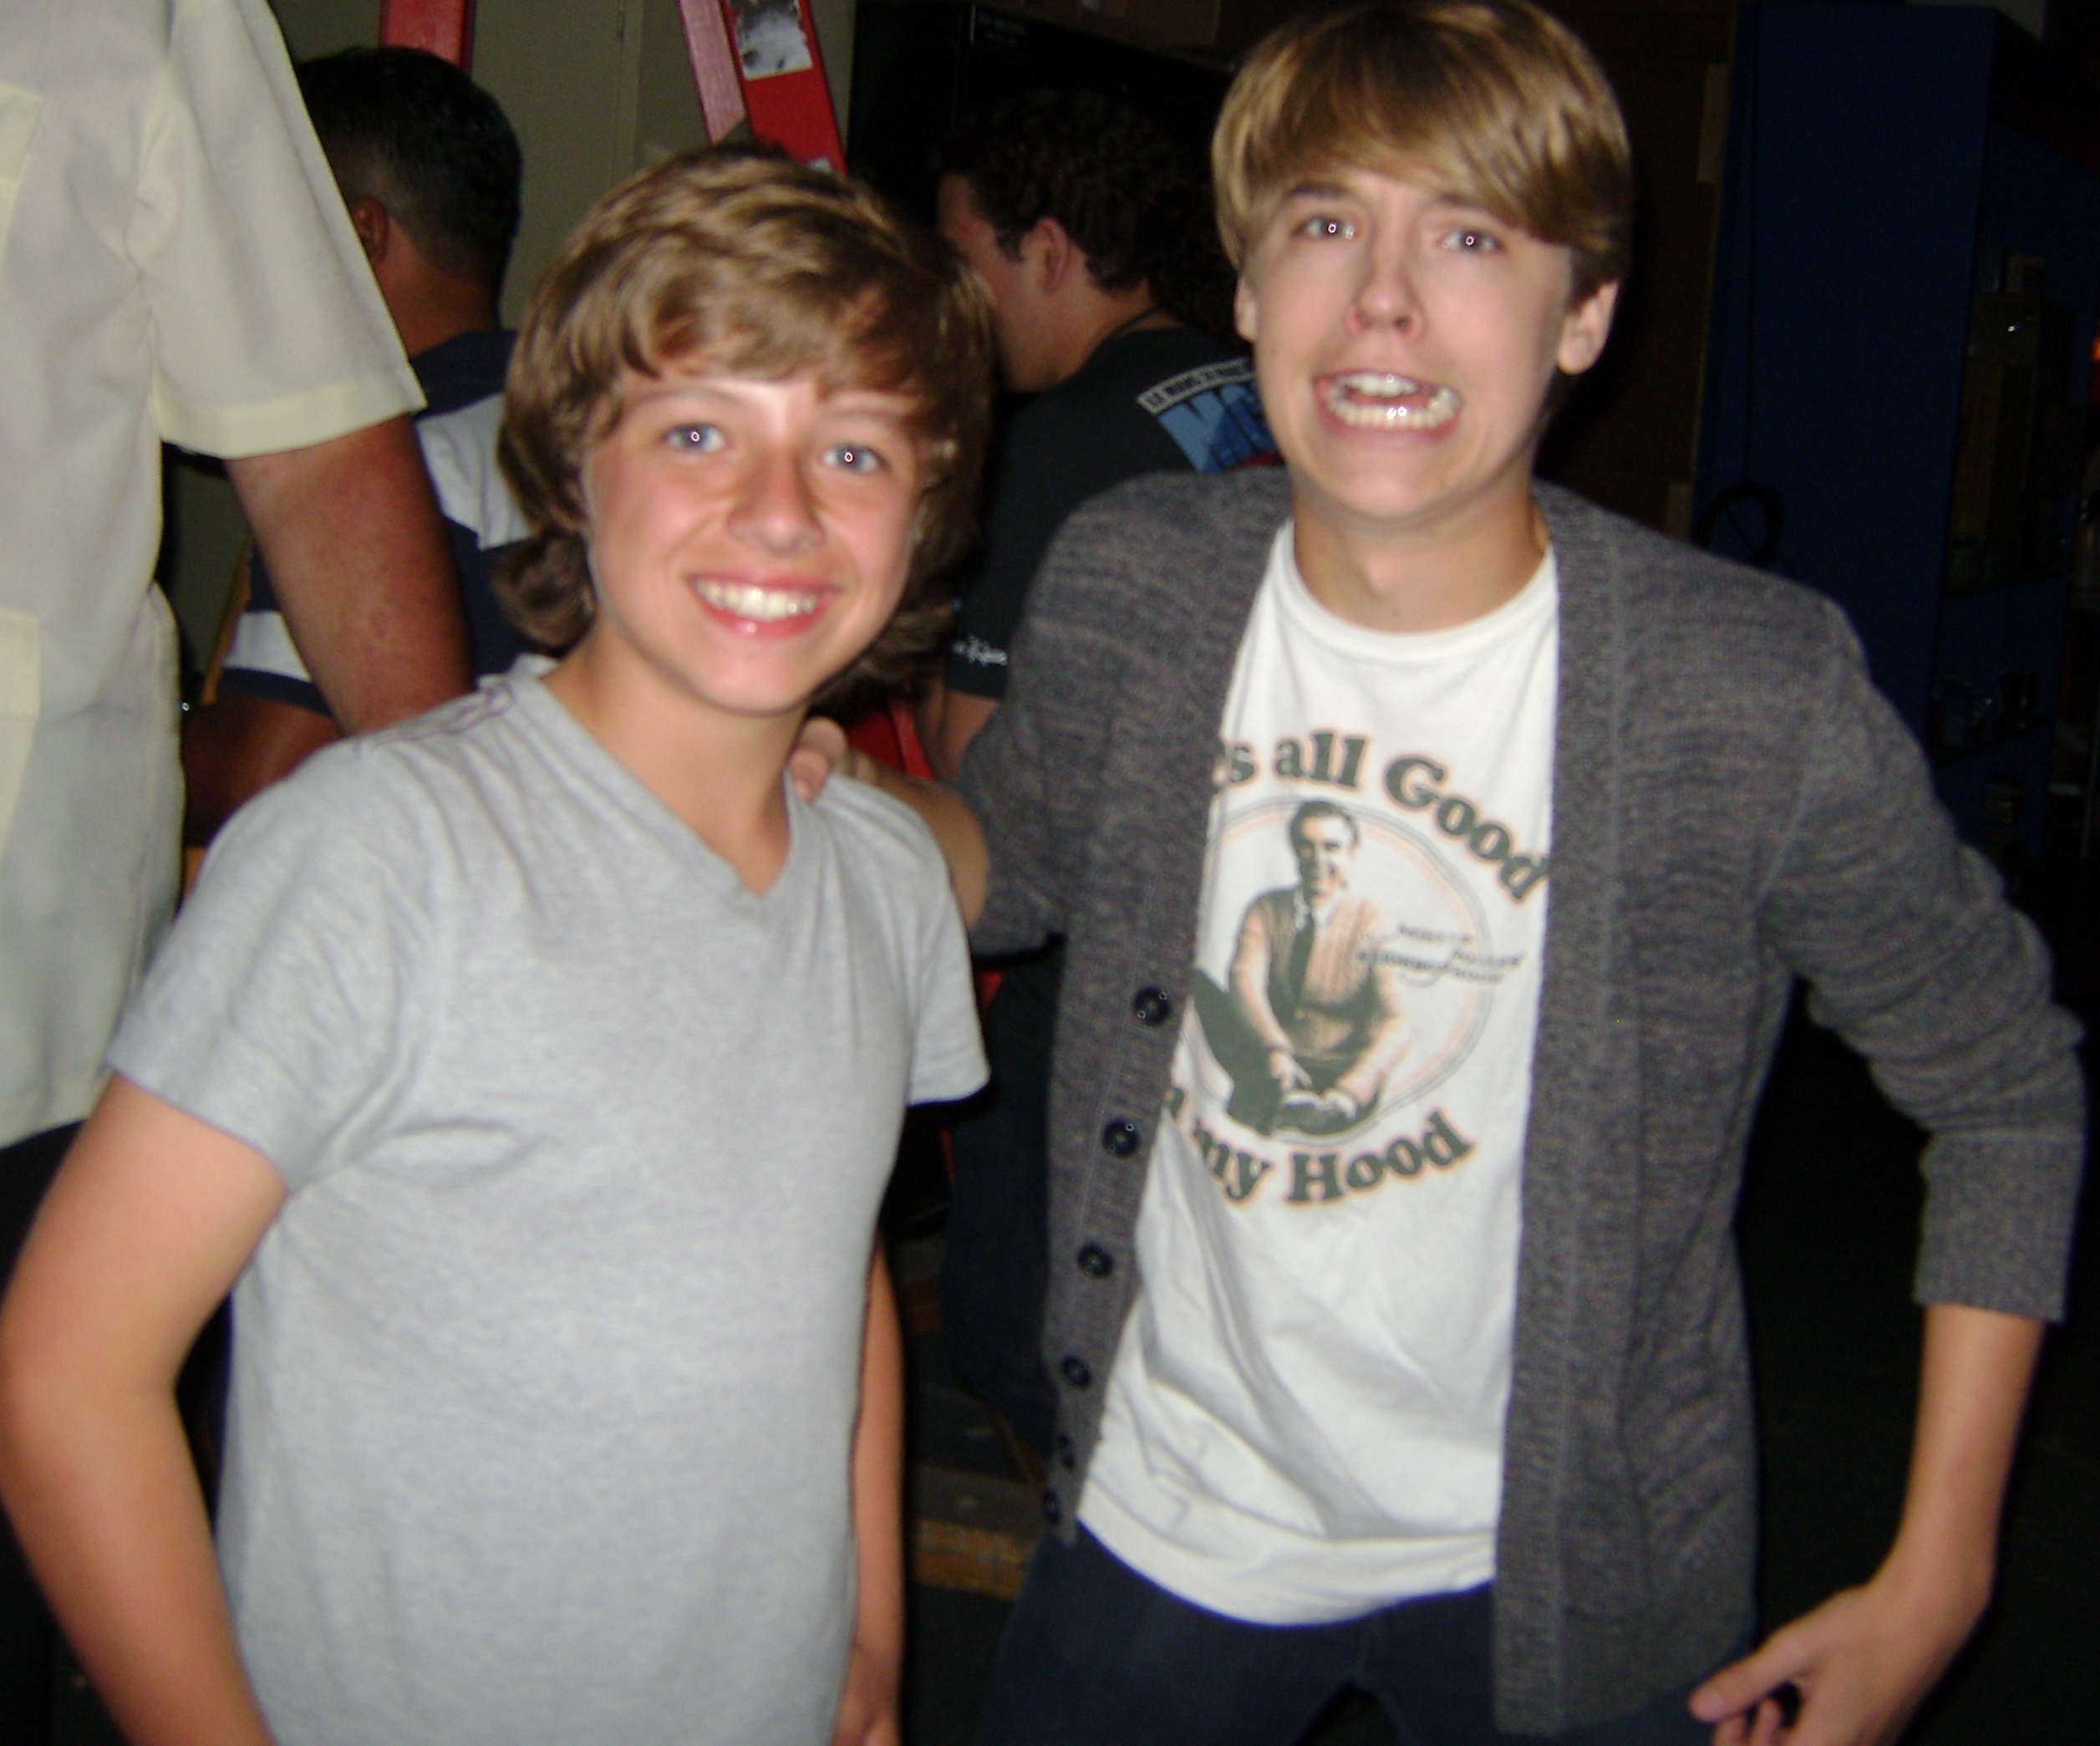 Austin with Cole Sprouse on the set of Suite Life on Deck